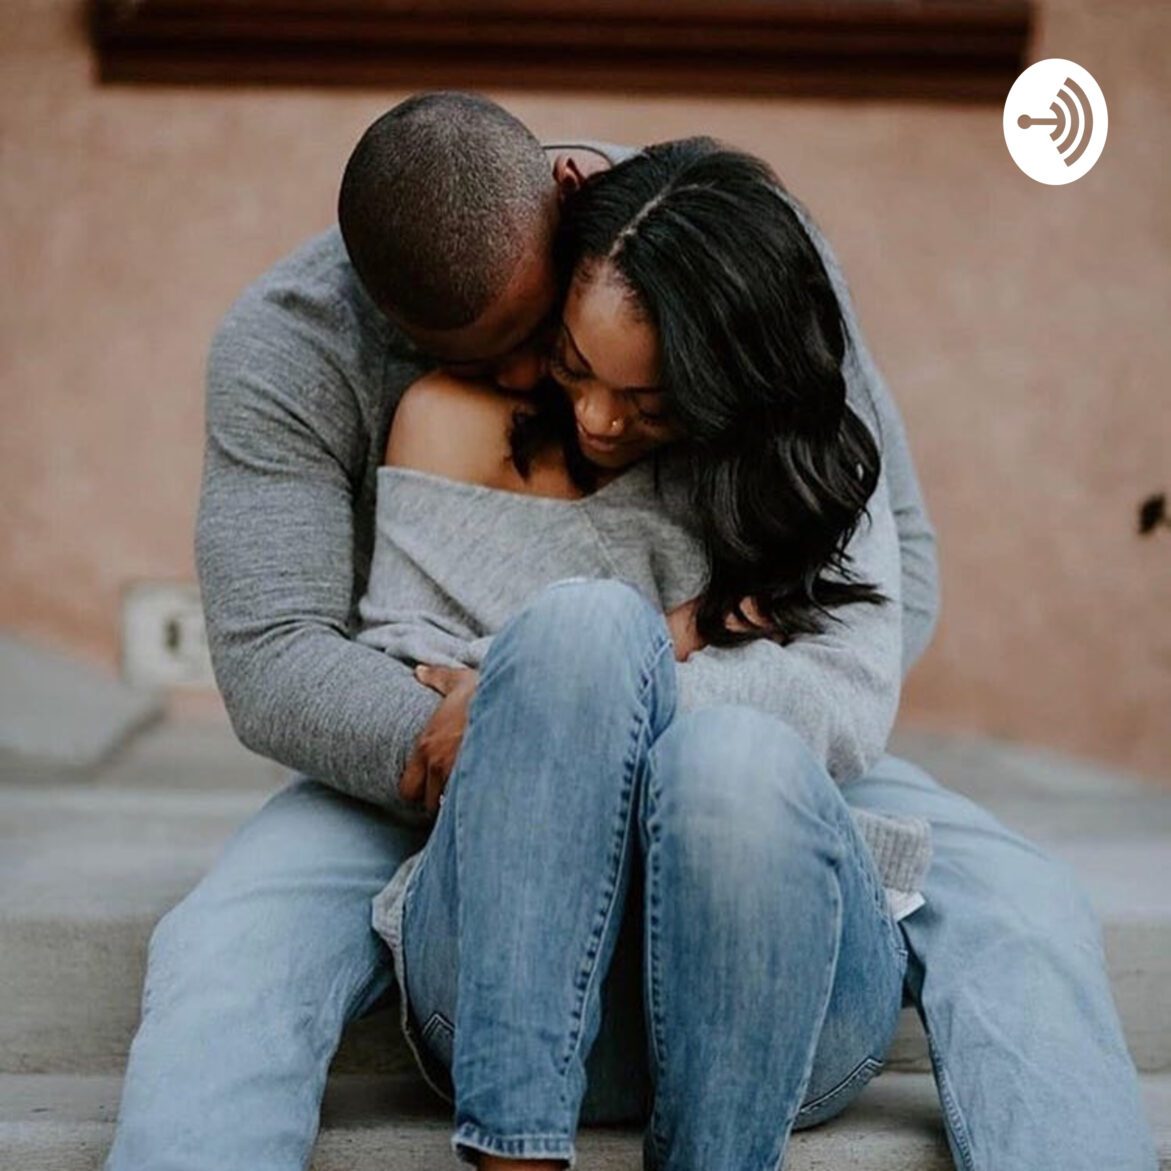 Black Podcasting - Disappointed Dating : Don’t let anyone get comfortable with disappointing you.